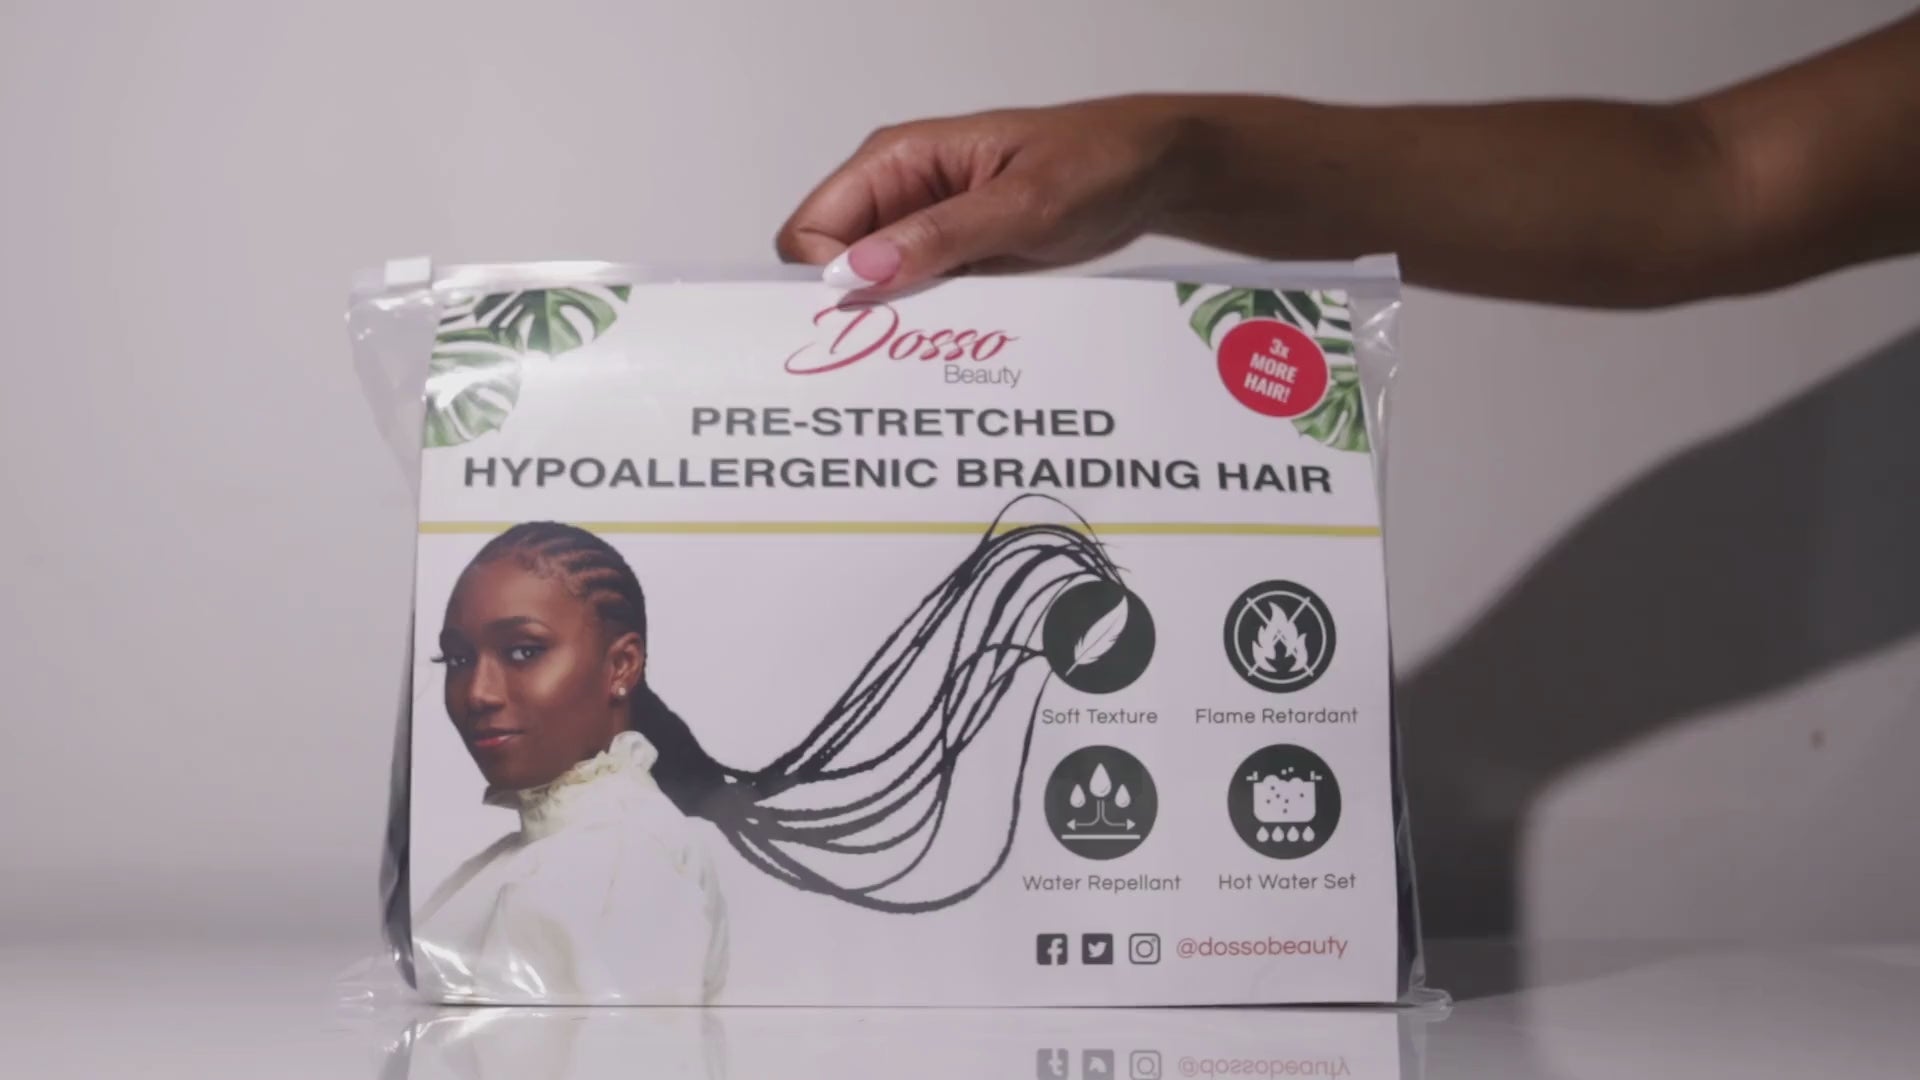 All-in-One Braid Install Product Kit | Dosso Beauty 1